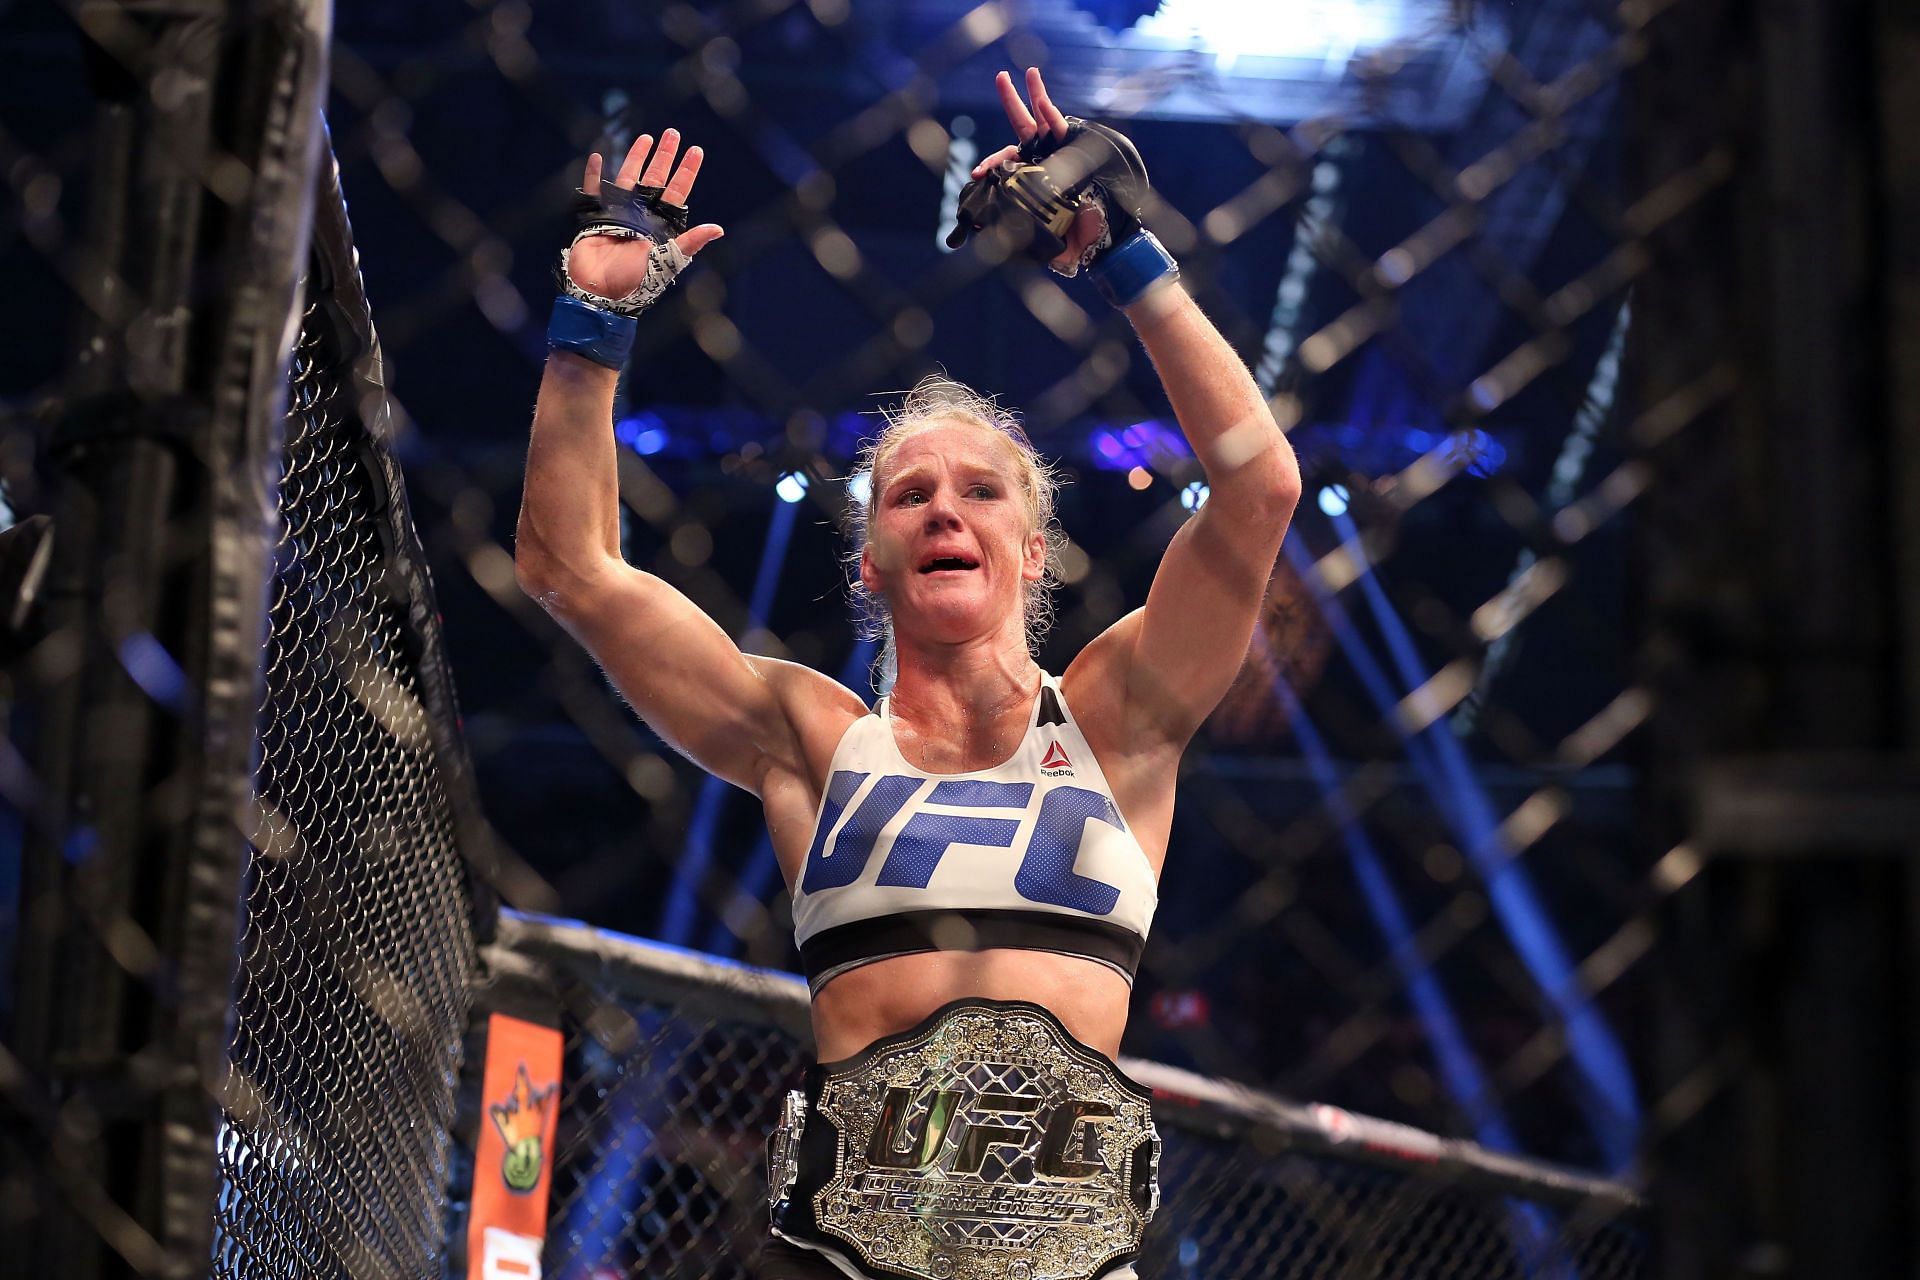 Holly Holm after her historic knockout of Ronda Rousey